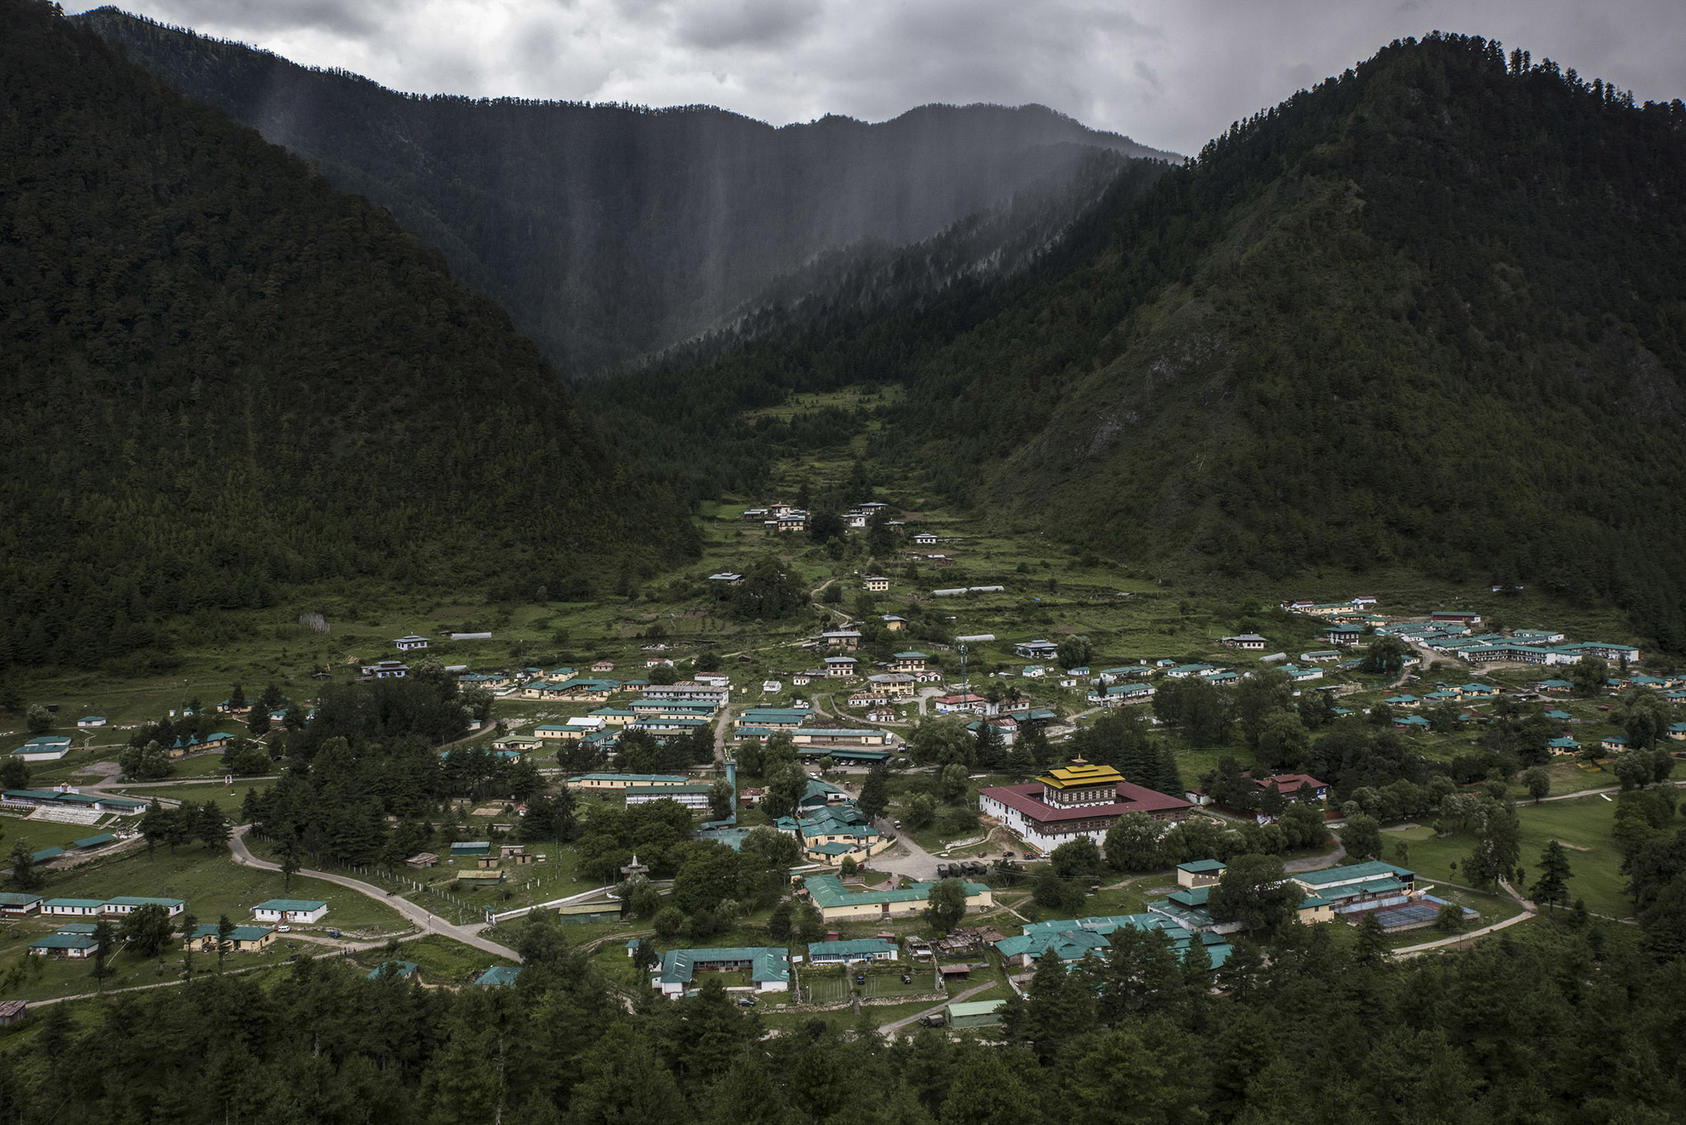 A regional headquarters for India's military in Haa, Bhutan, near a border area claimed by both India and China, Aug. 3, 2017. (Gilles Sabrie/The New York Times)